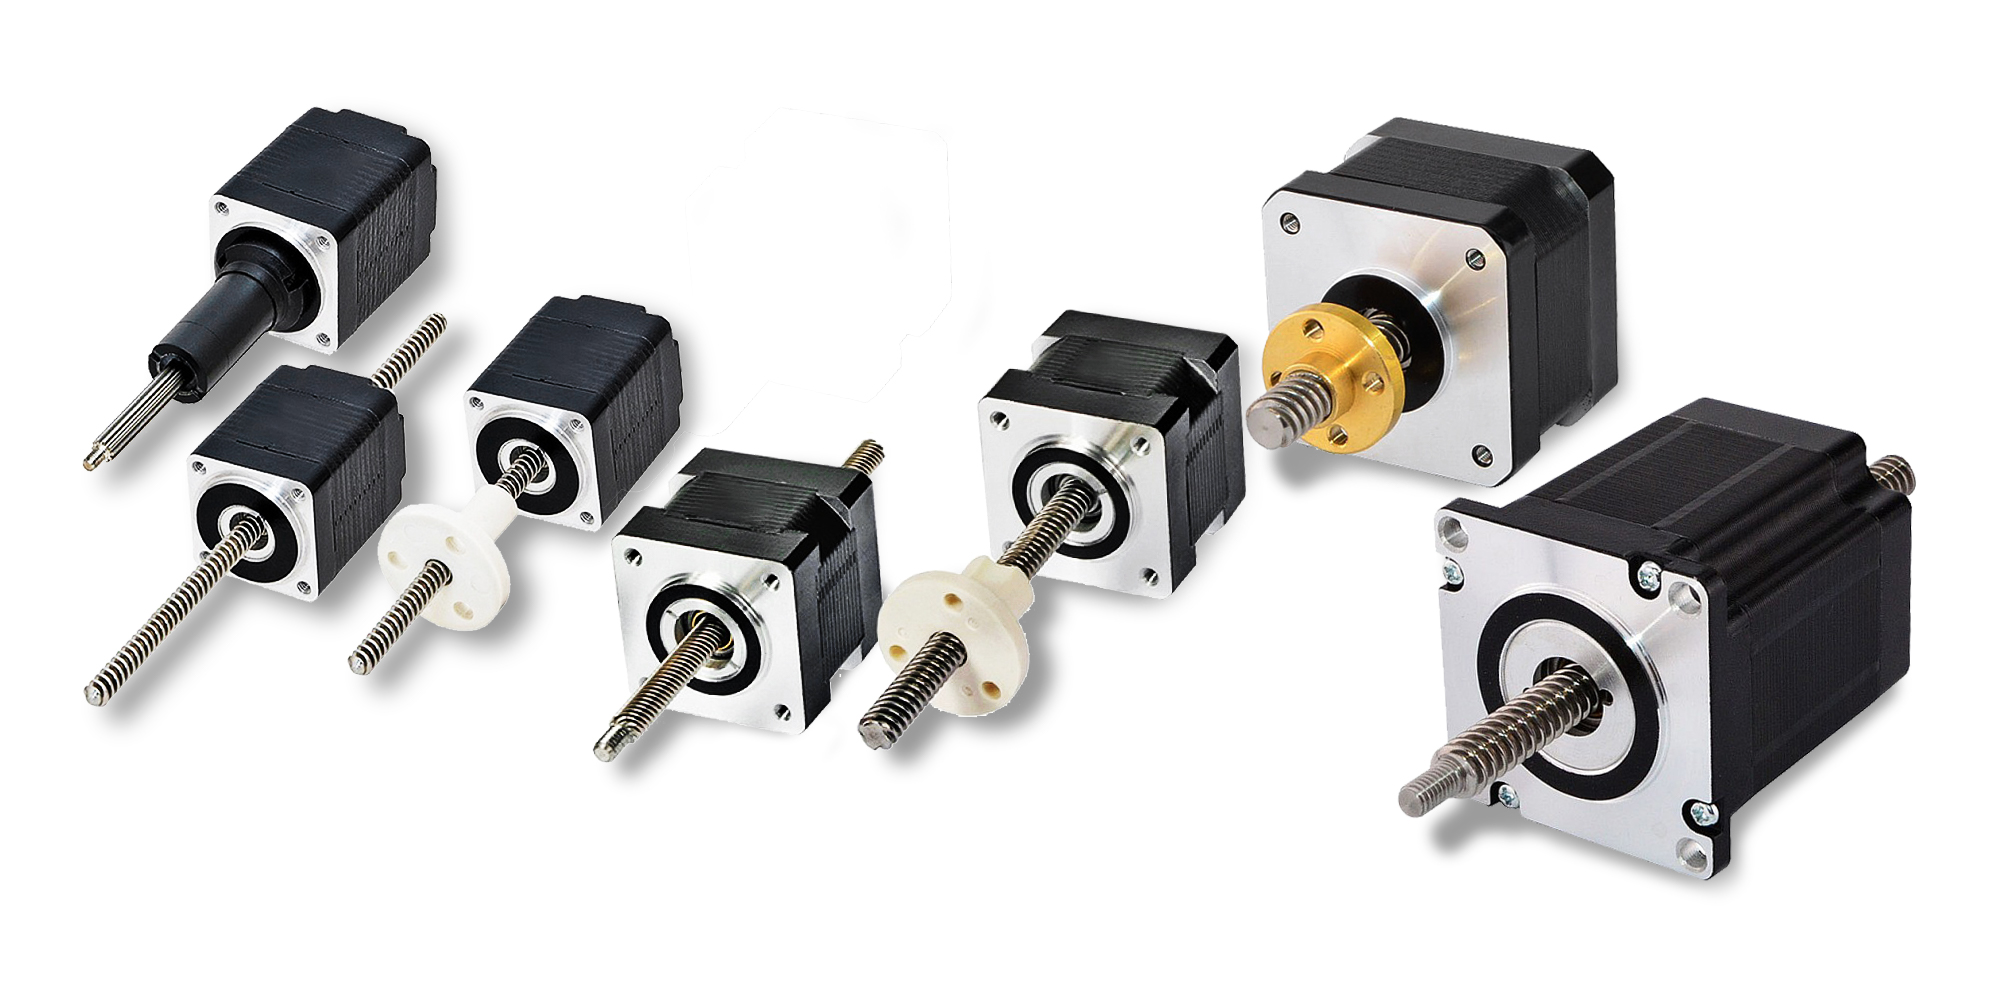 Stepper Motors - An Article Lets you Know Everything About Stepper Motors